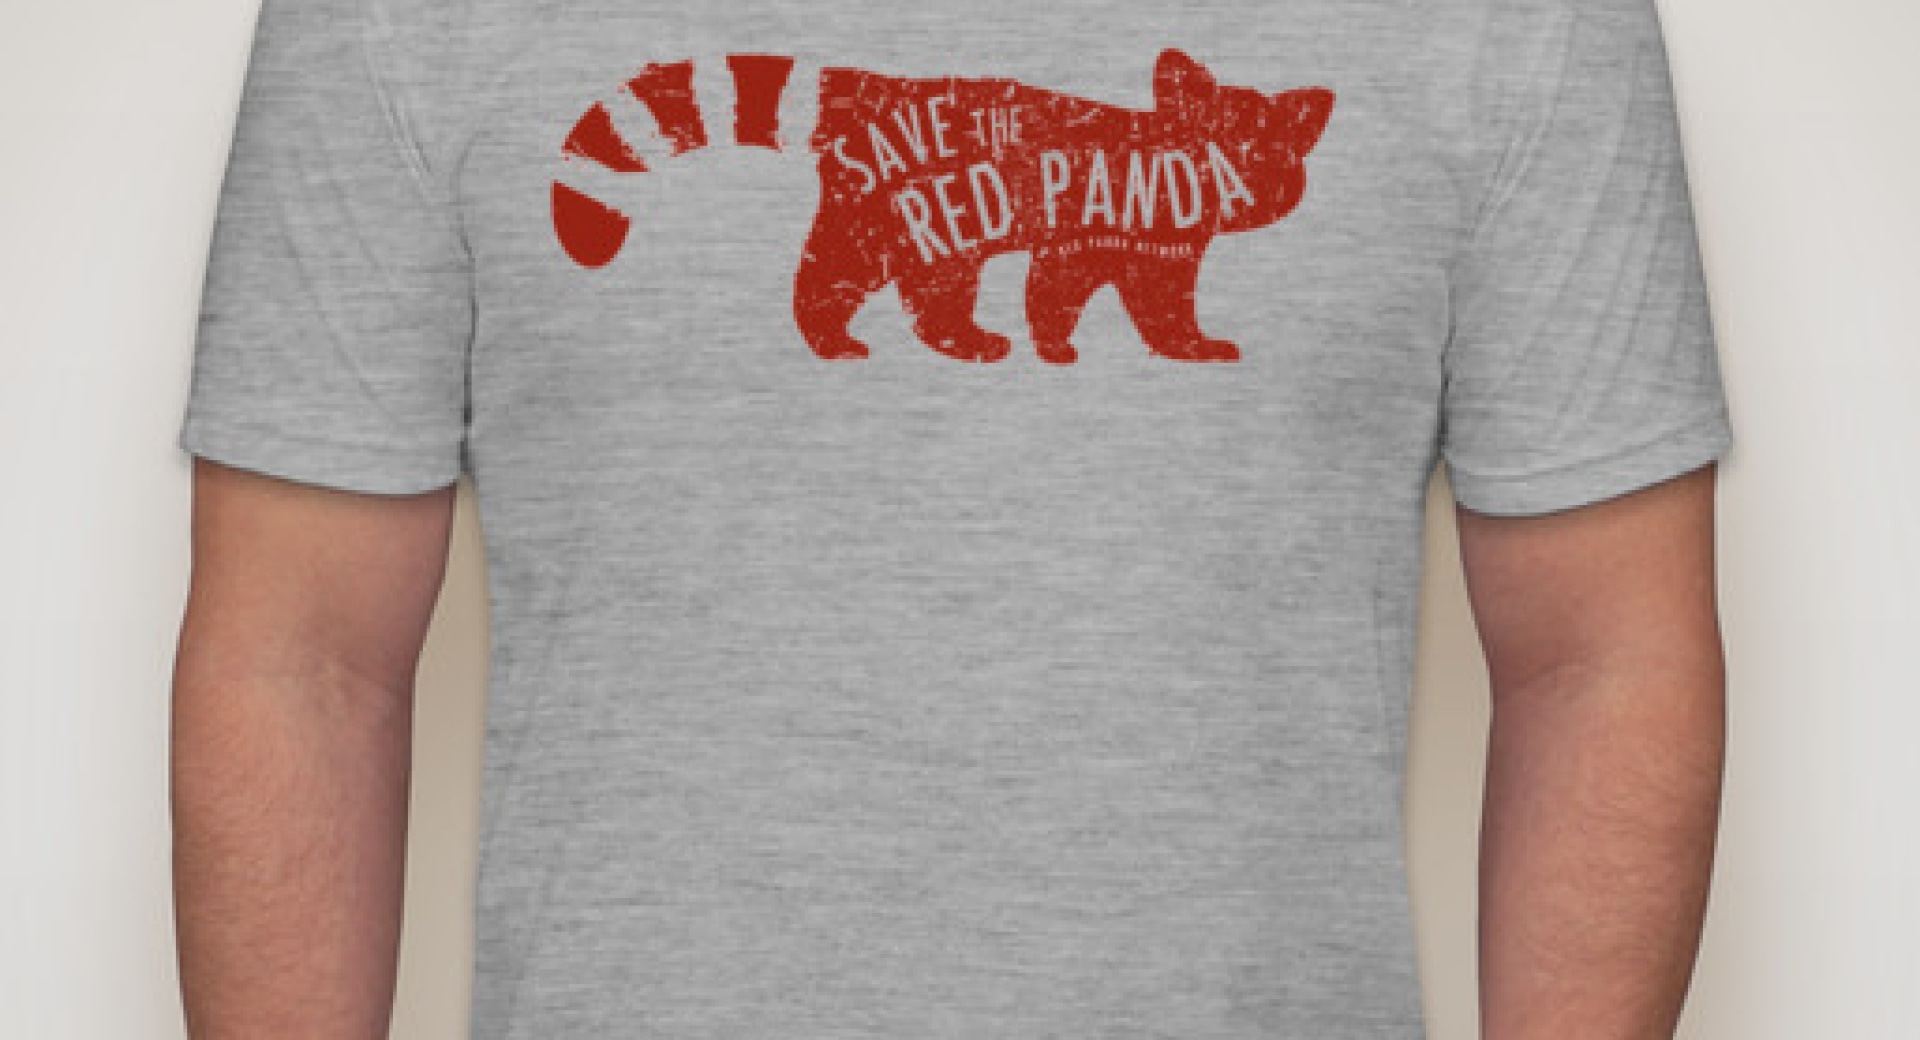 Celebrate Earth Day - Red Panda Style!